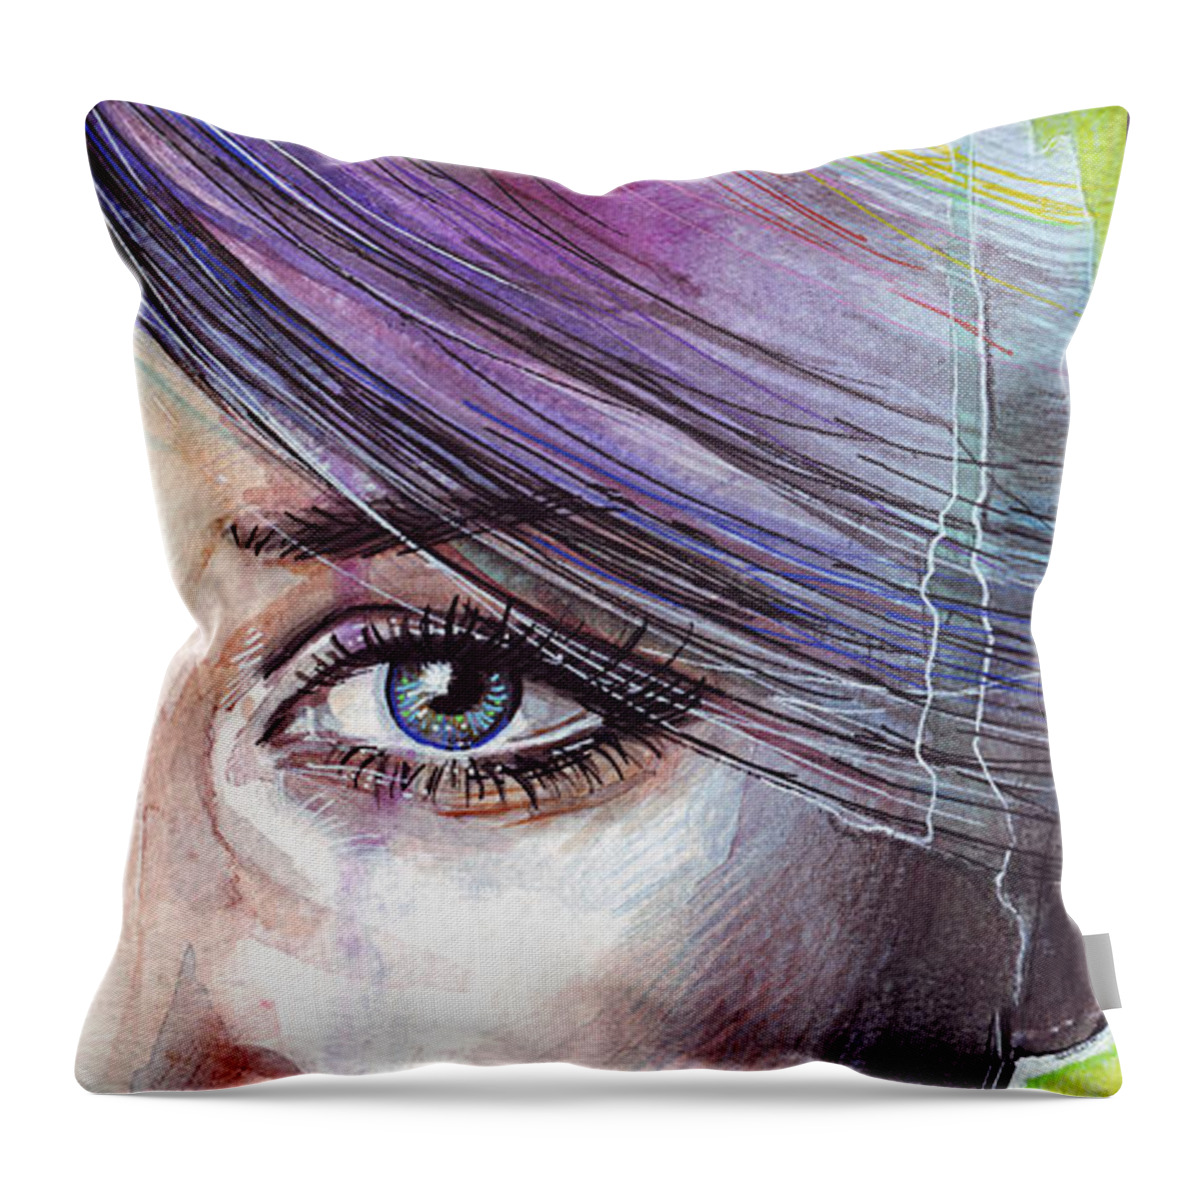 Watercolor Painting Throw Pillow featuring the painting Prismatic Visions by Olga Shvartsur